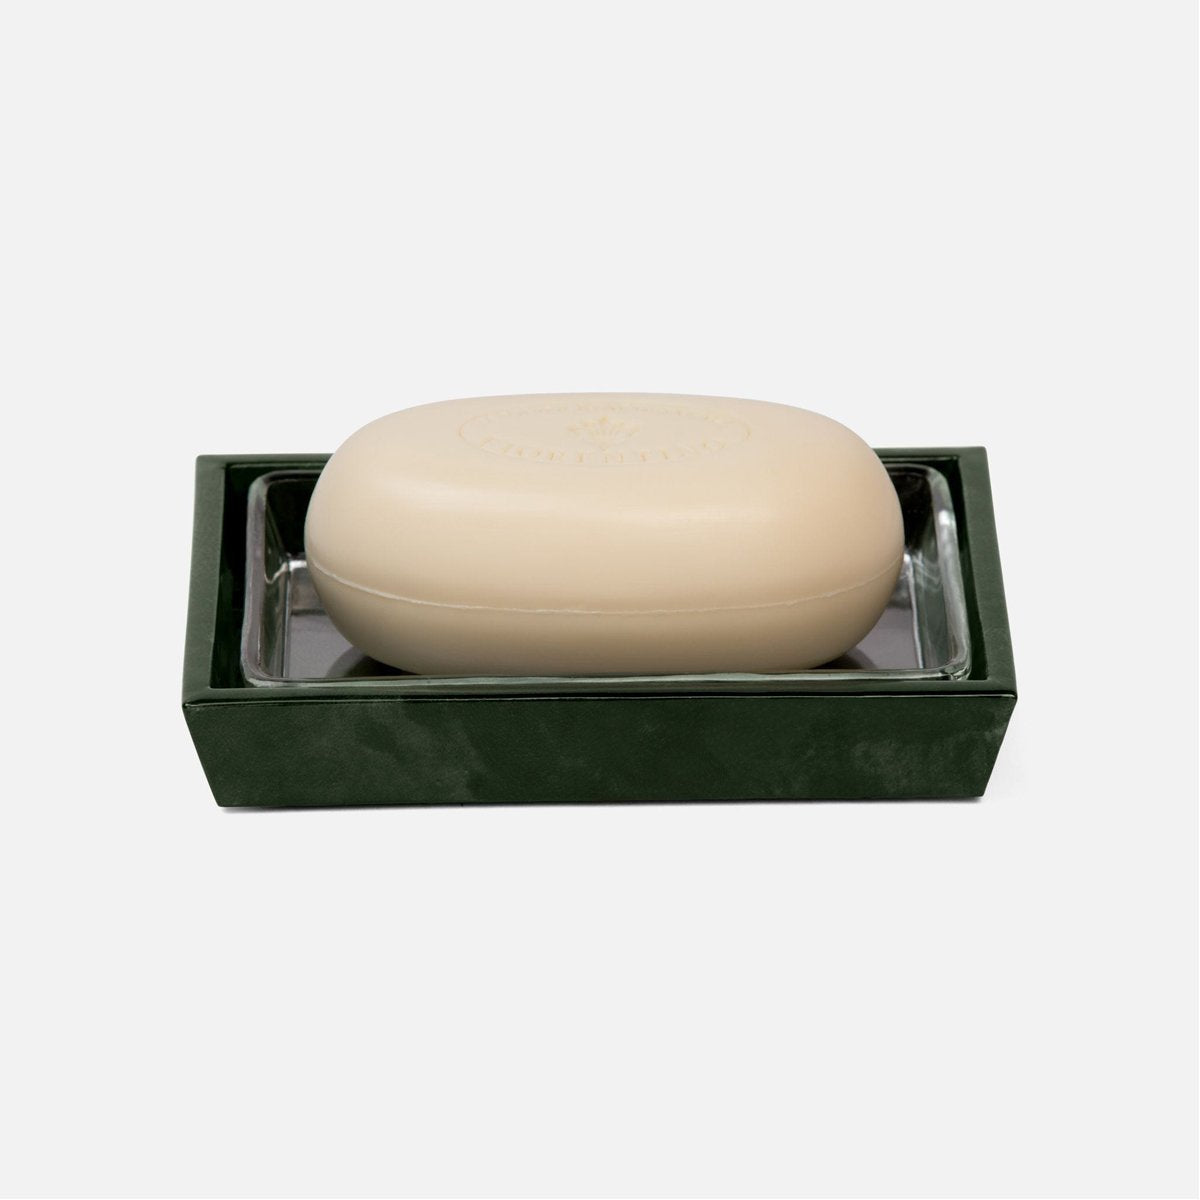 Pigeon and Poodle Carlow Rectangular Soap Dish, Tapered